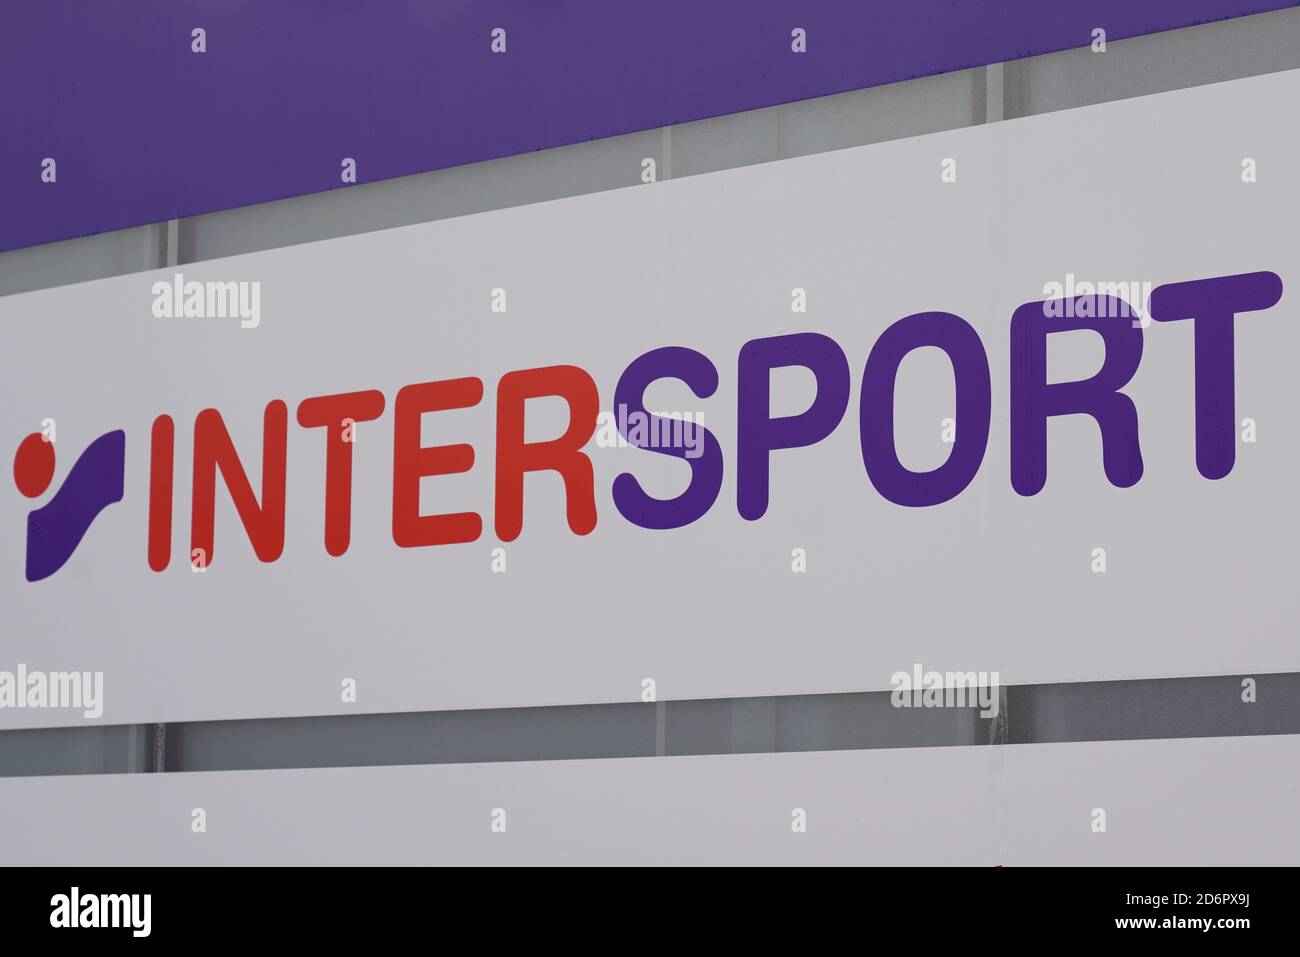 Bordeaux , Aquitaine / France - 10 10 2020 : Intersport logo and text sign front of shop sporty retail french chain of Sports Supplies store Stock Photo